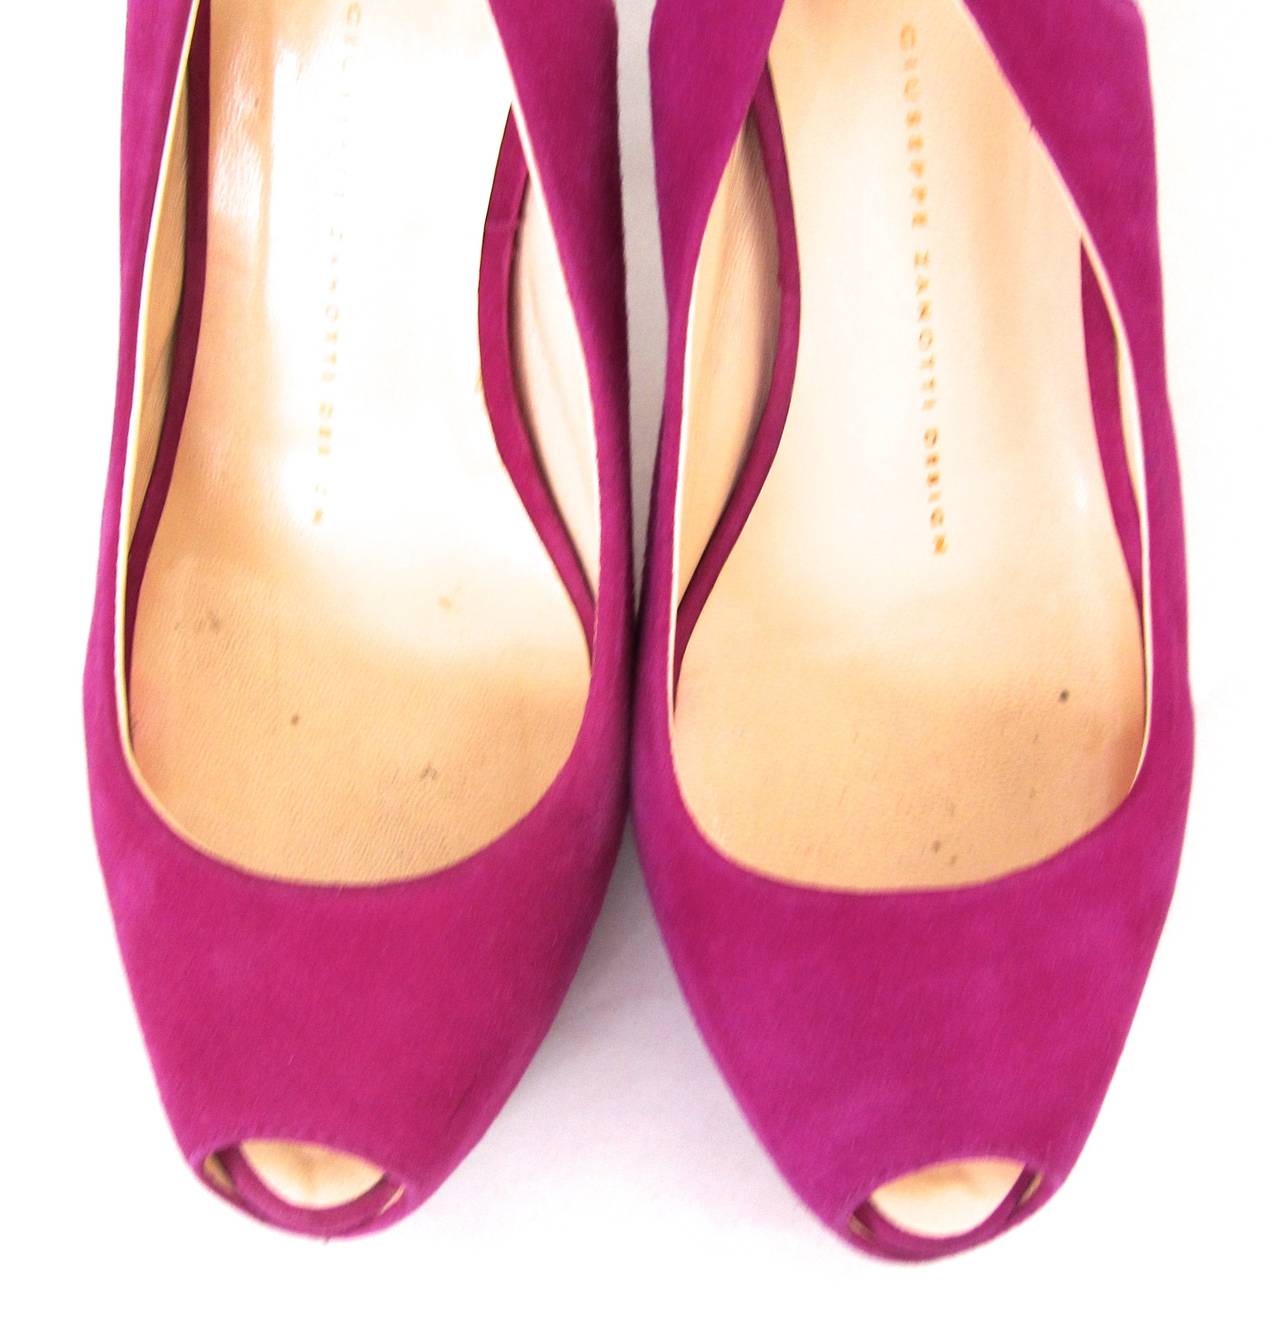 Giuseppe Zanotti Pink Fuchsia Suede Pumps with Heel Strap - Size 37 In Excellent Condition For Sale In Boca Raton, FL